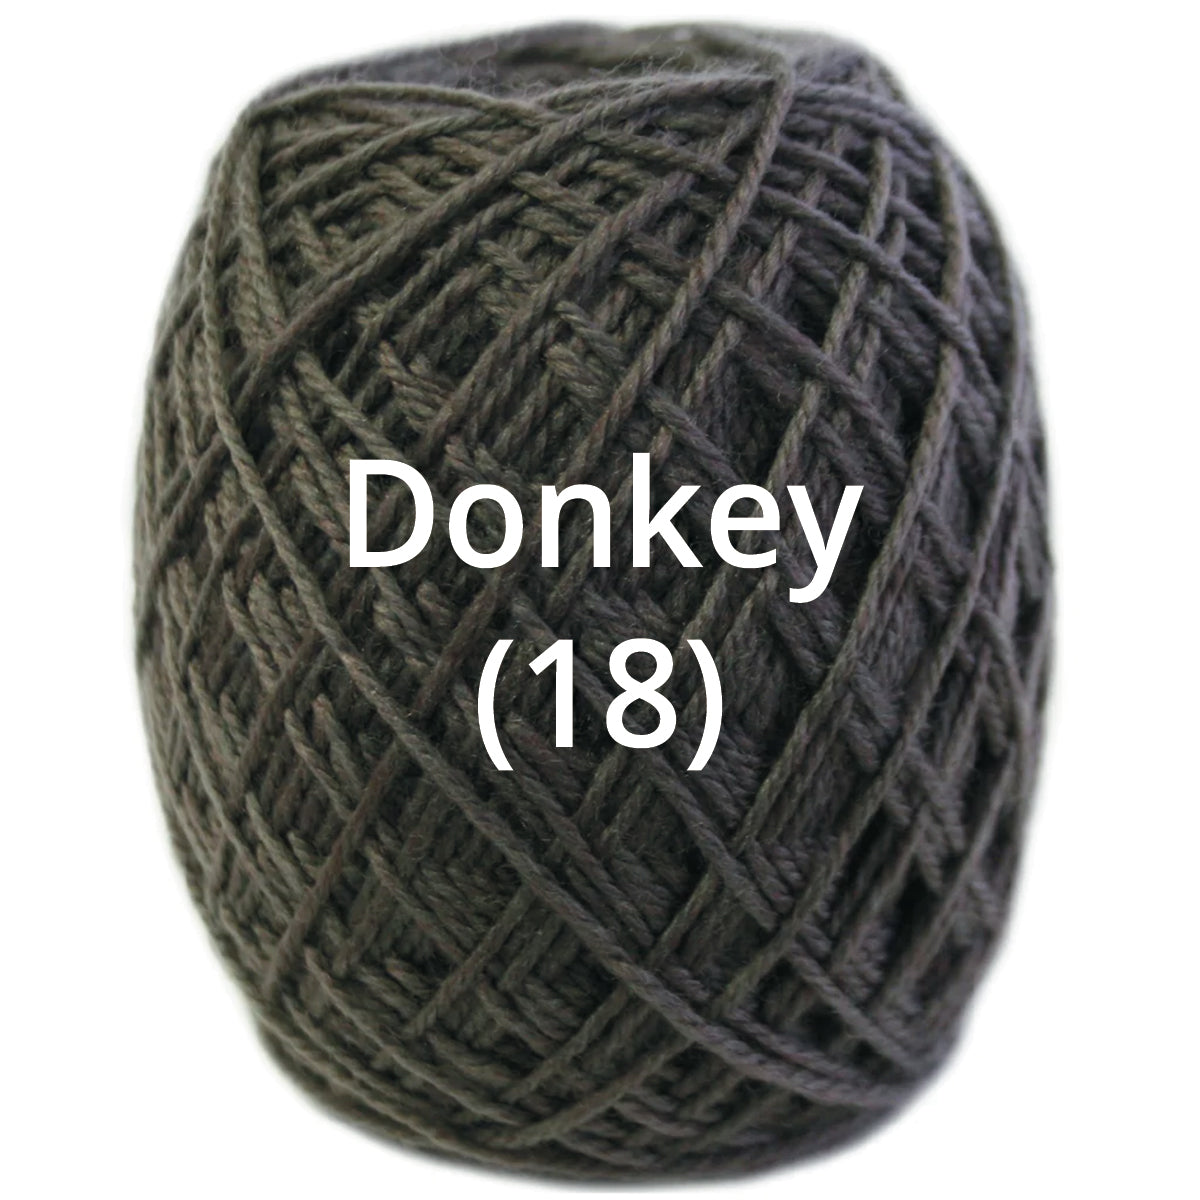 Donkey - Nundle Collection 4 Ply Sock Yarn